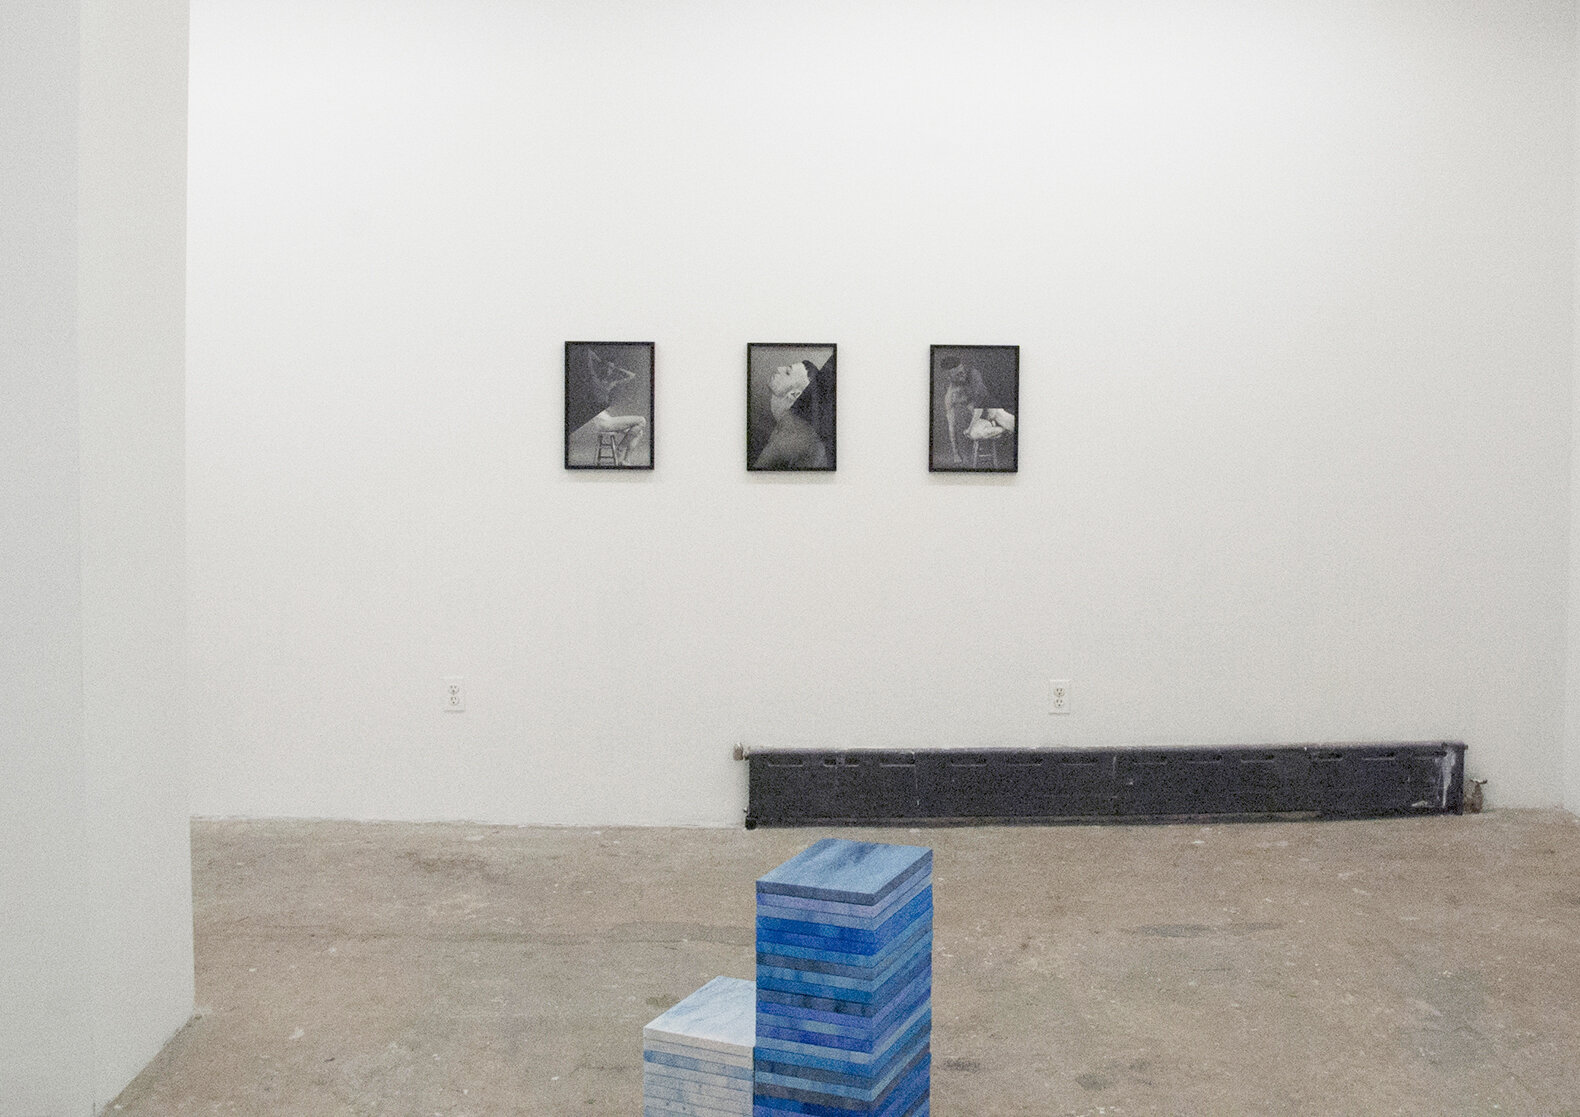 Installation image from the 2013 exhibition, Wet, Curated by Brad Silk, featuring works by David Schoerner &amp; Lyndsy Welgos, at Cindy Rucker Gallery